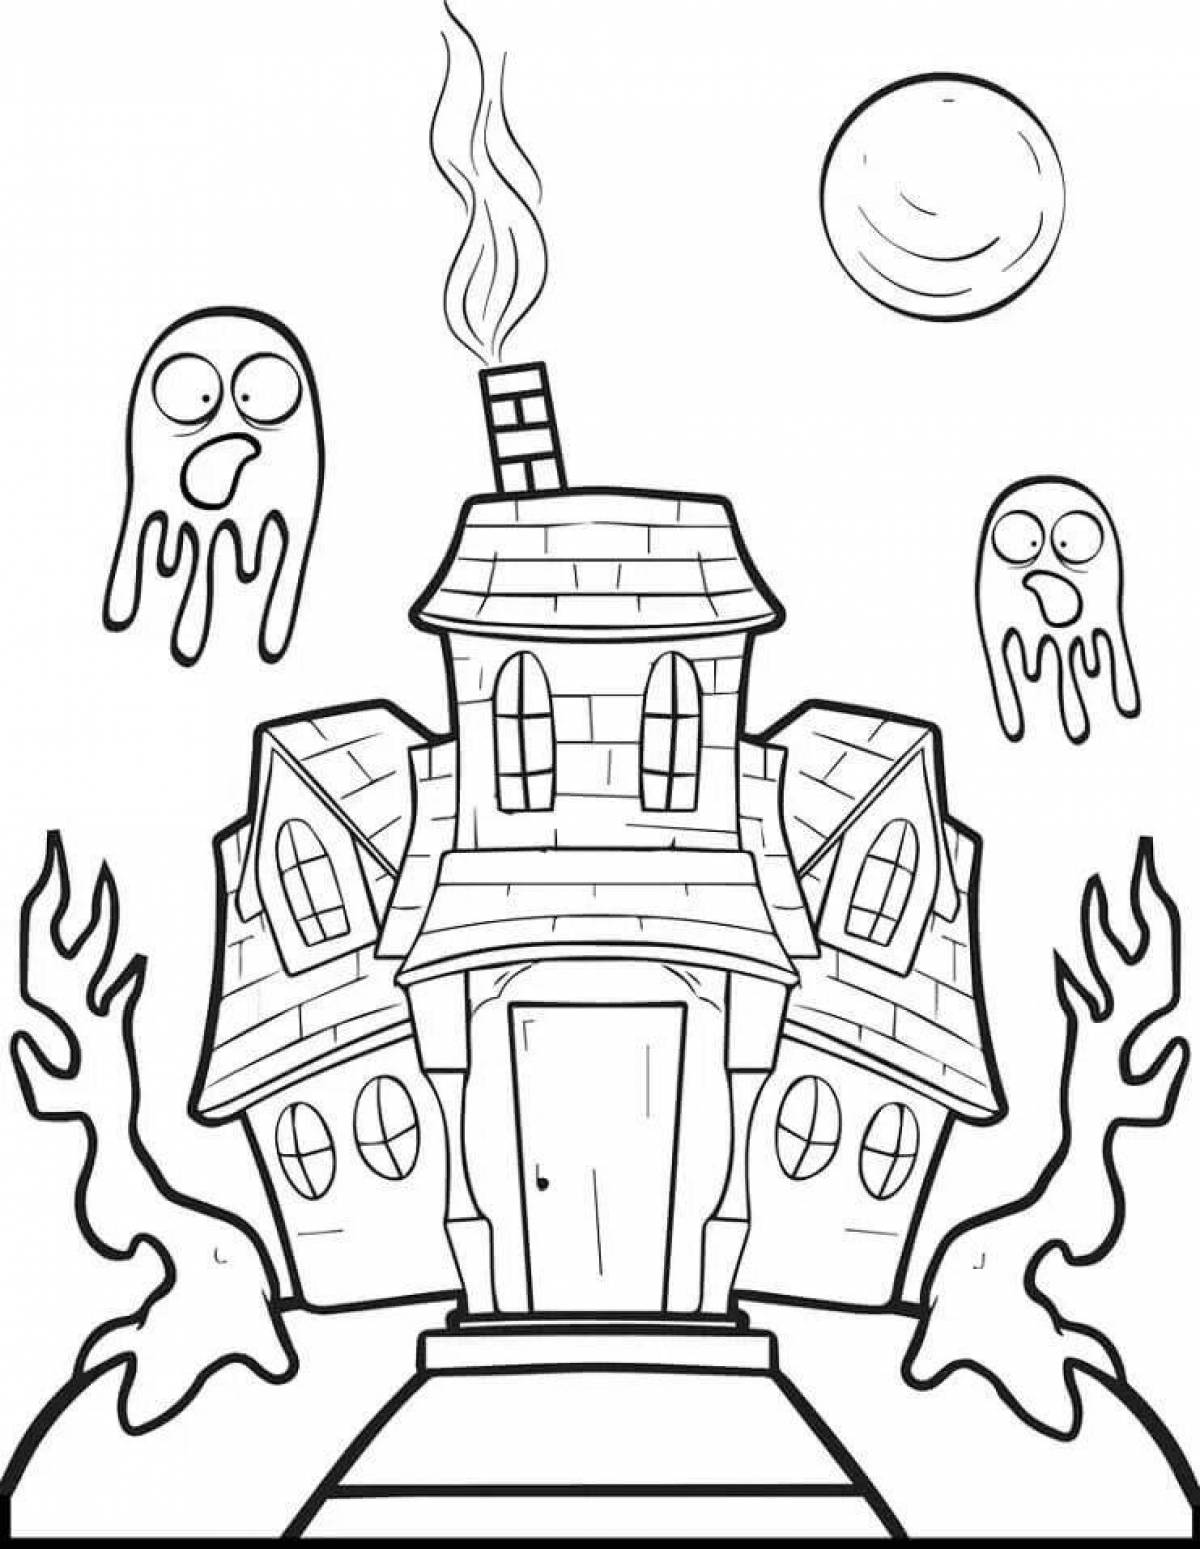 Coloring page cheerful homebody